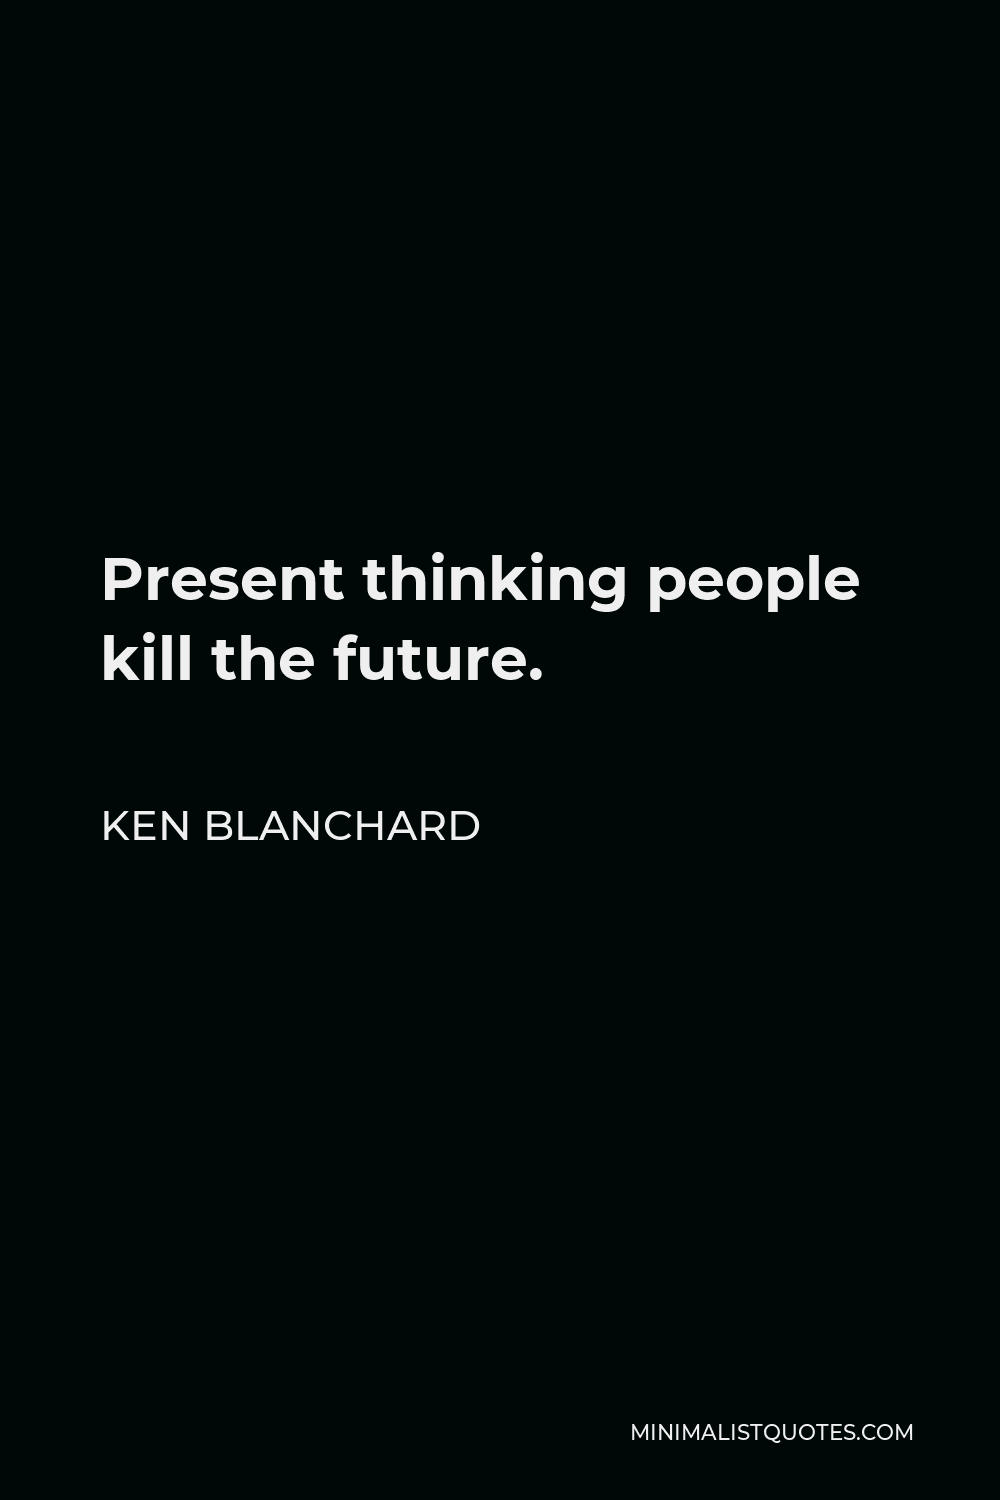 Ken Blanchard Quote - Present thinking people kill the future.